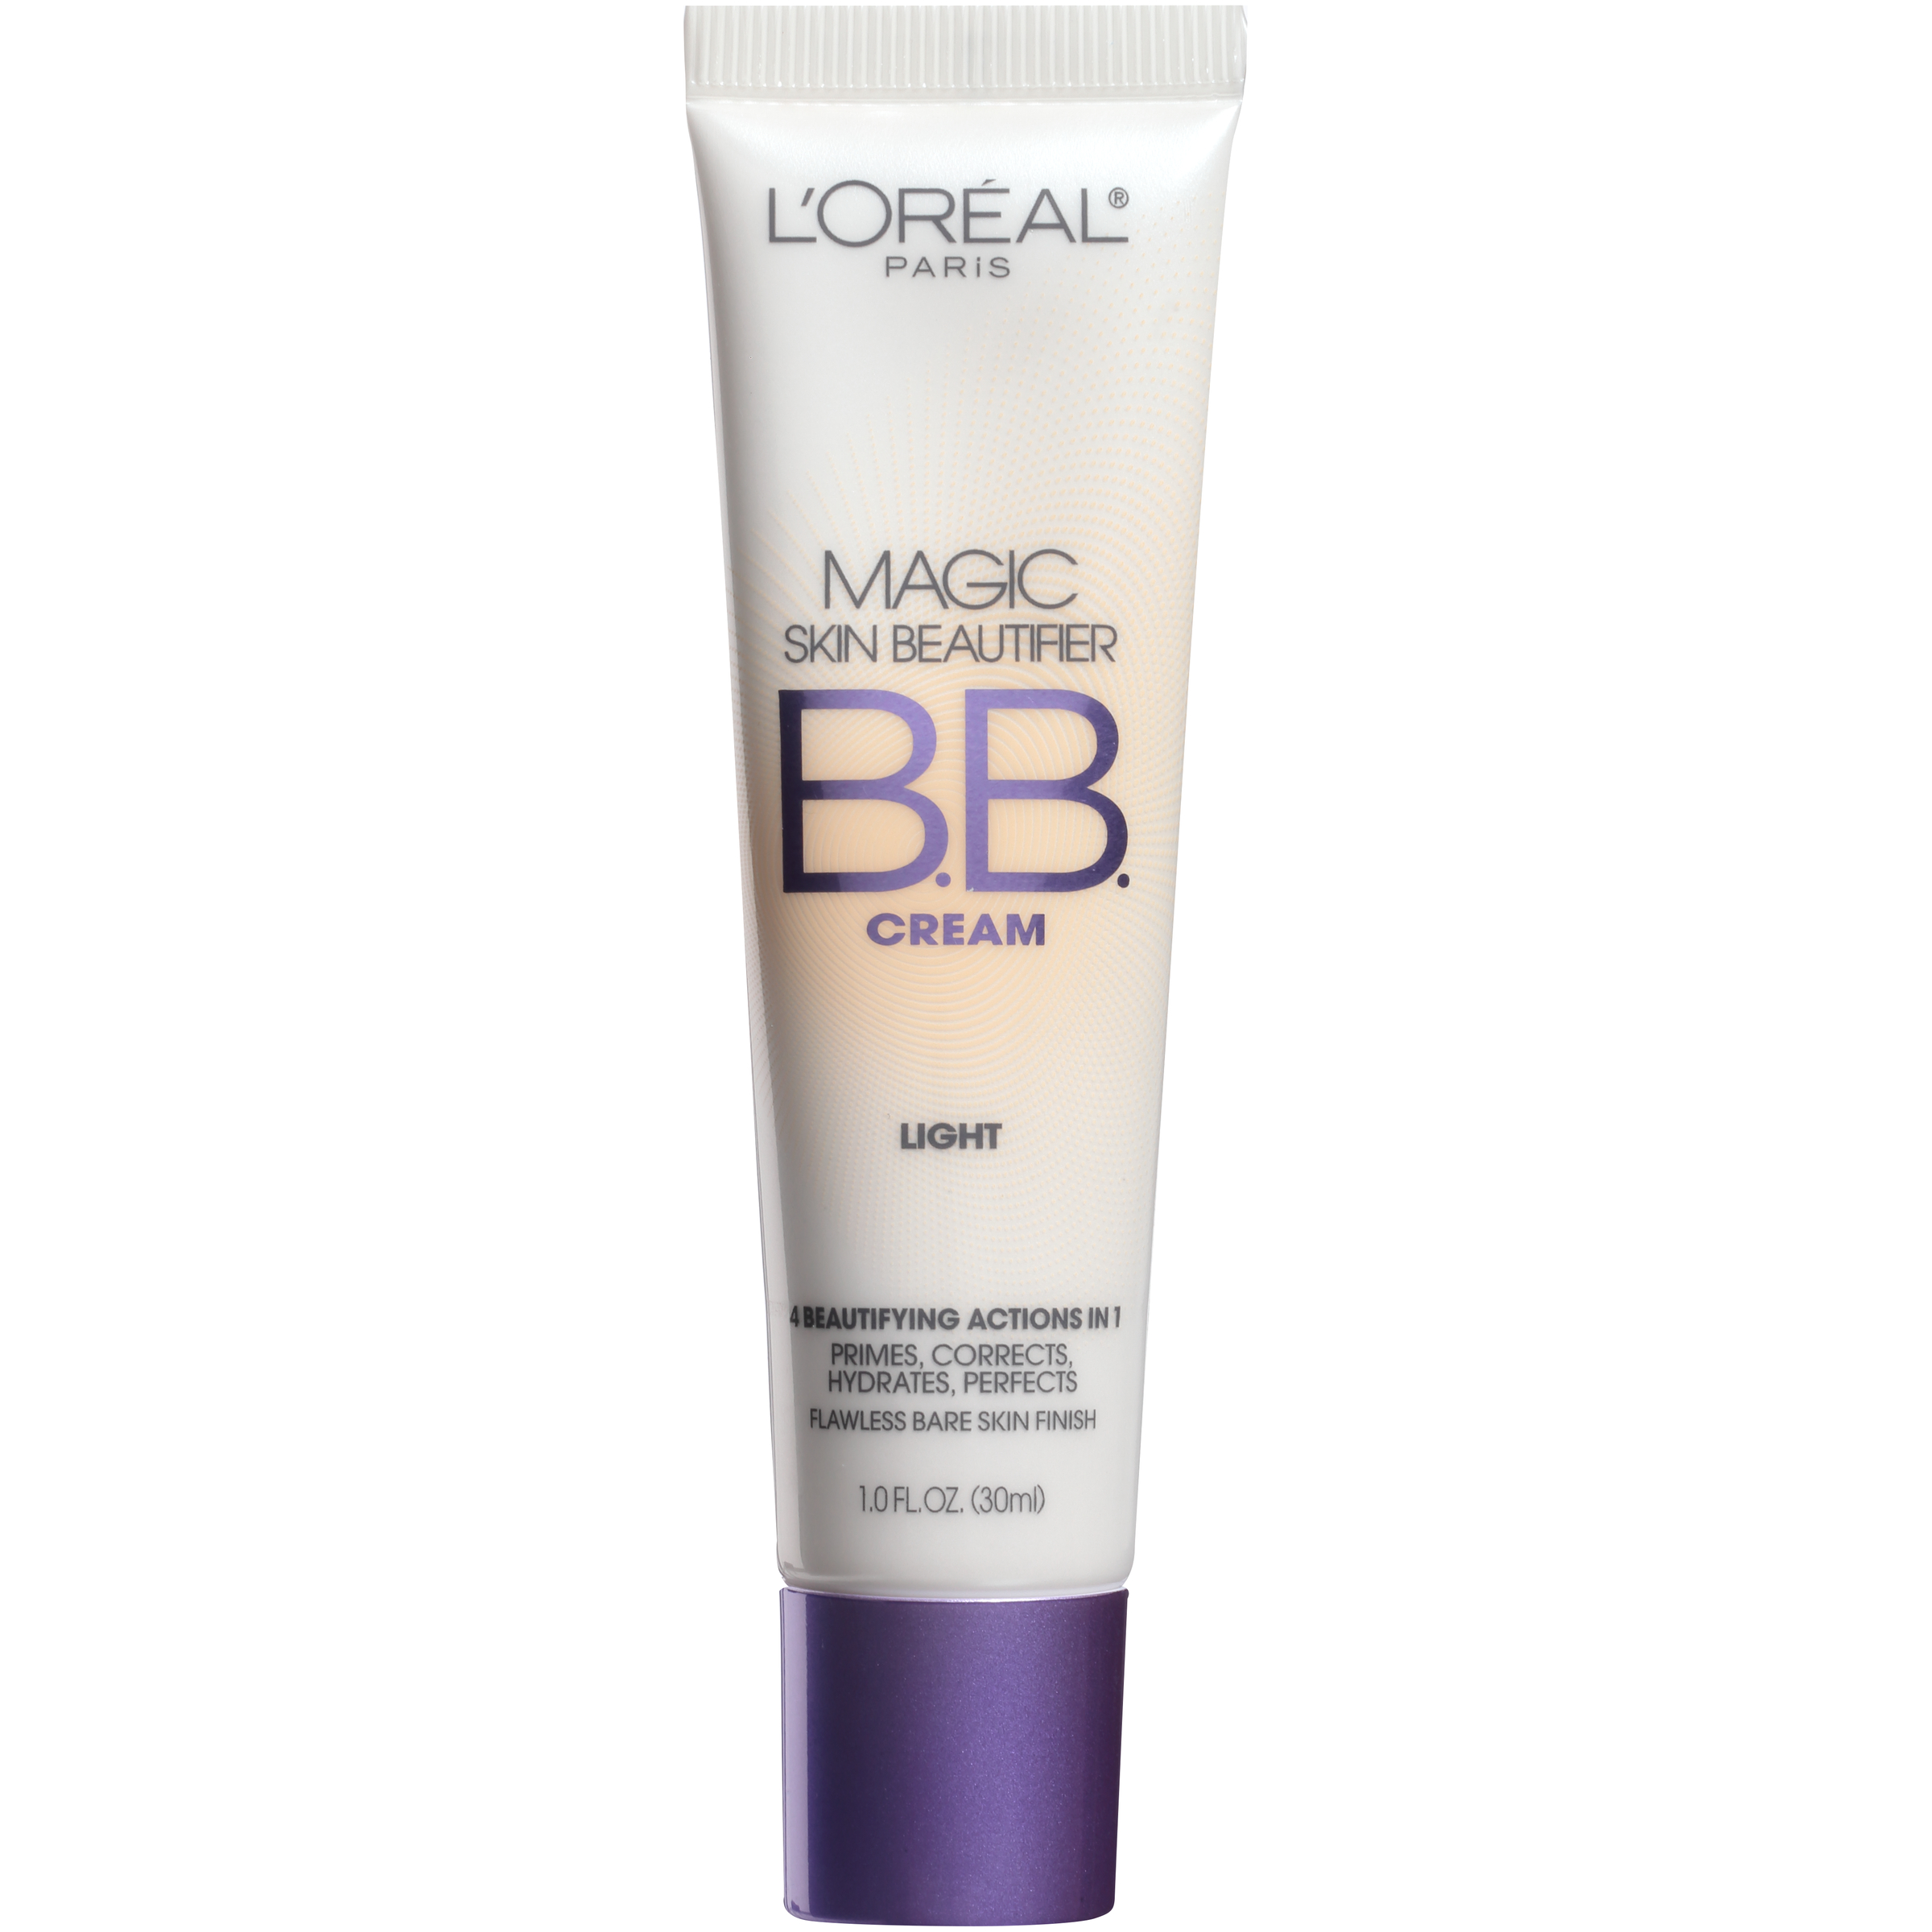 l oreal skin perfection bb cream review